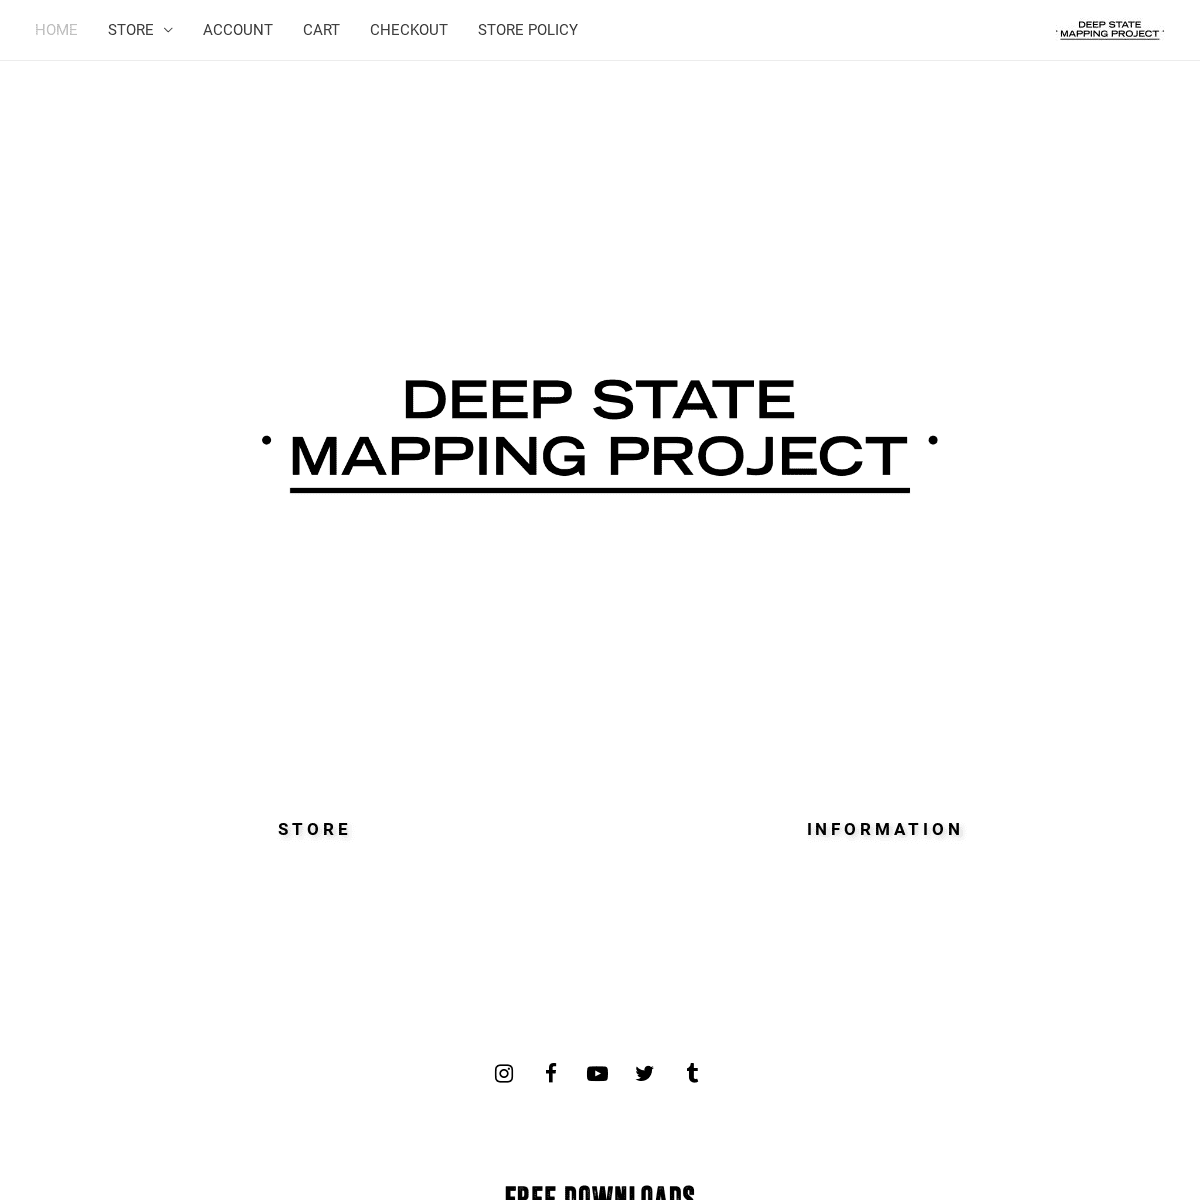 A complete backup of deepstatemappingproject.com